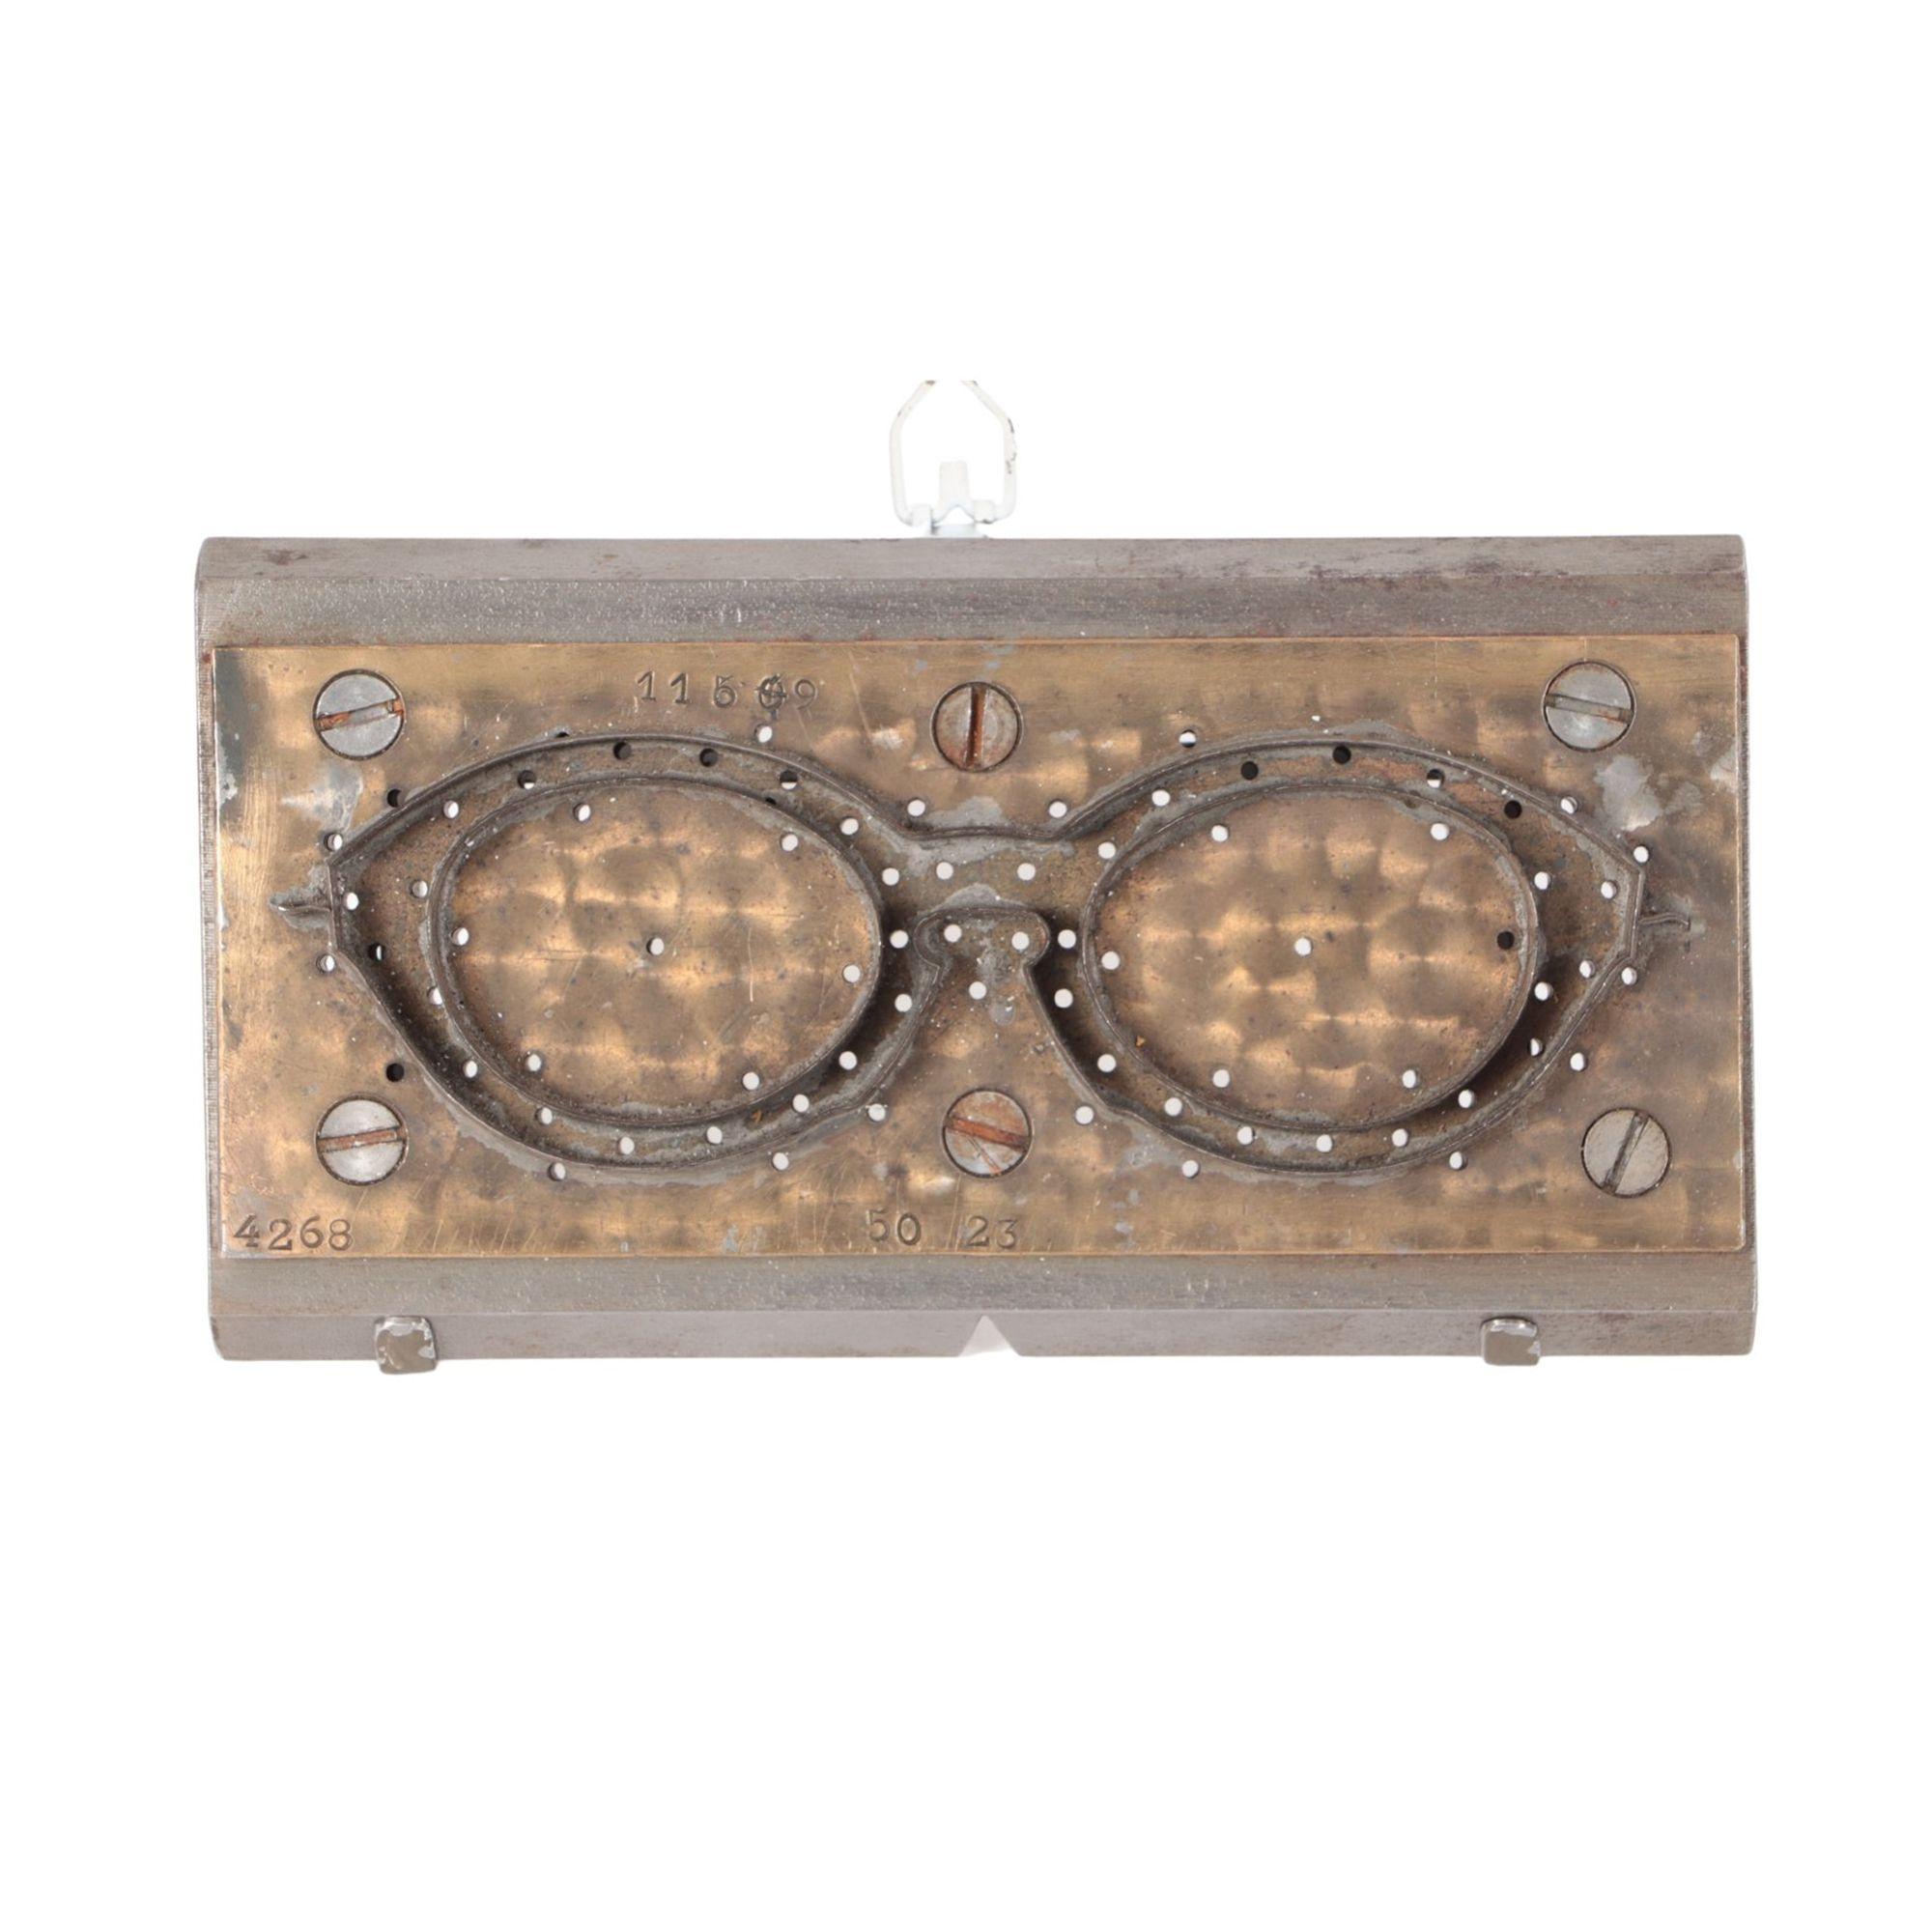 A Vintage midcentury steel and brass eyeglass sculpture circa 1950.The mold is screwed to heavy steel forms with front and back beveled edges.